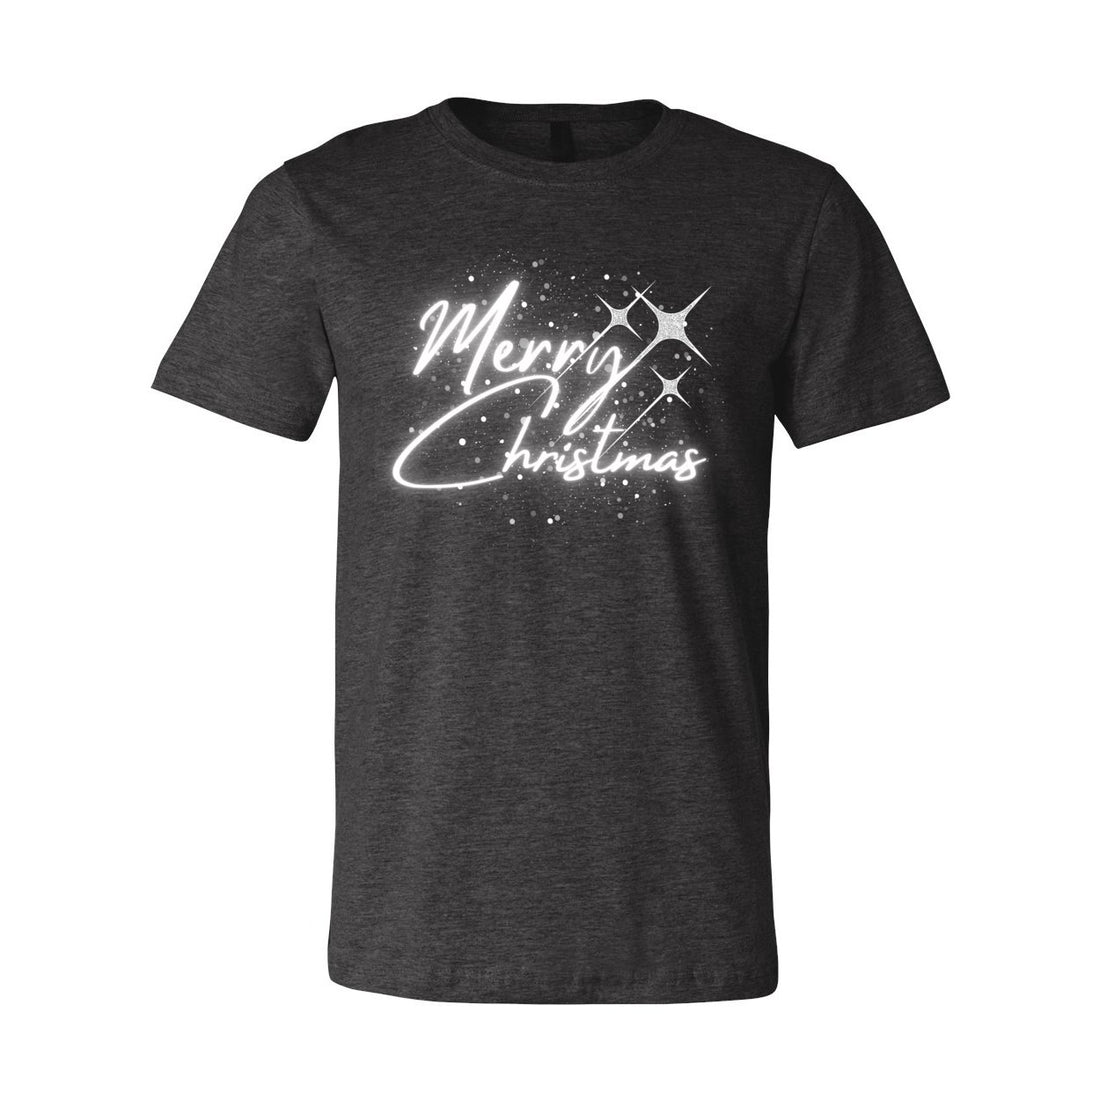 Merry White Christmas - T-Shirts - Positively Sassy - Merry White Christmas